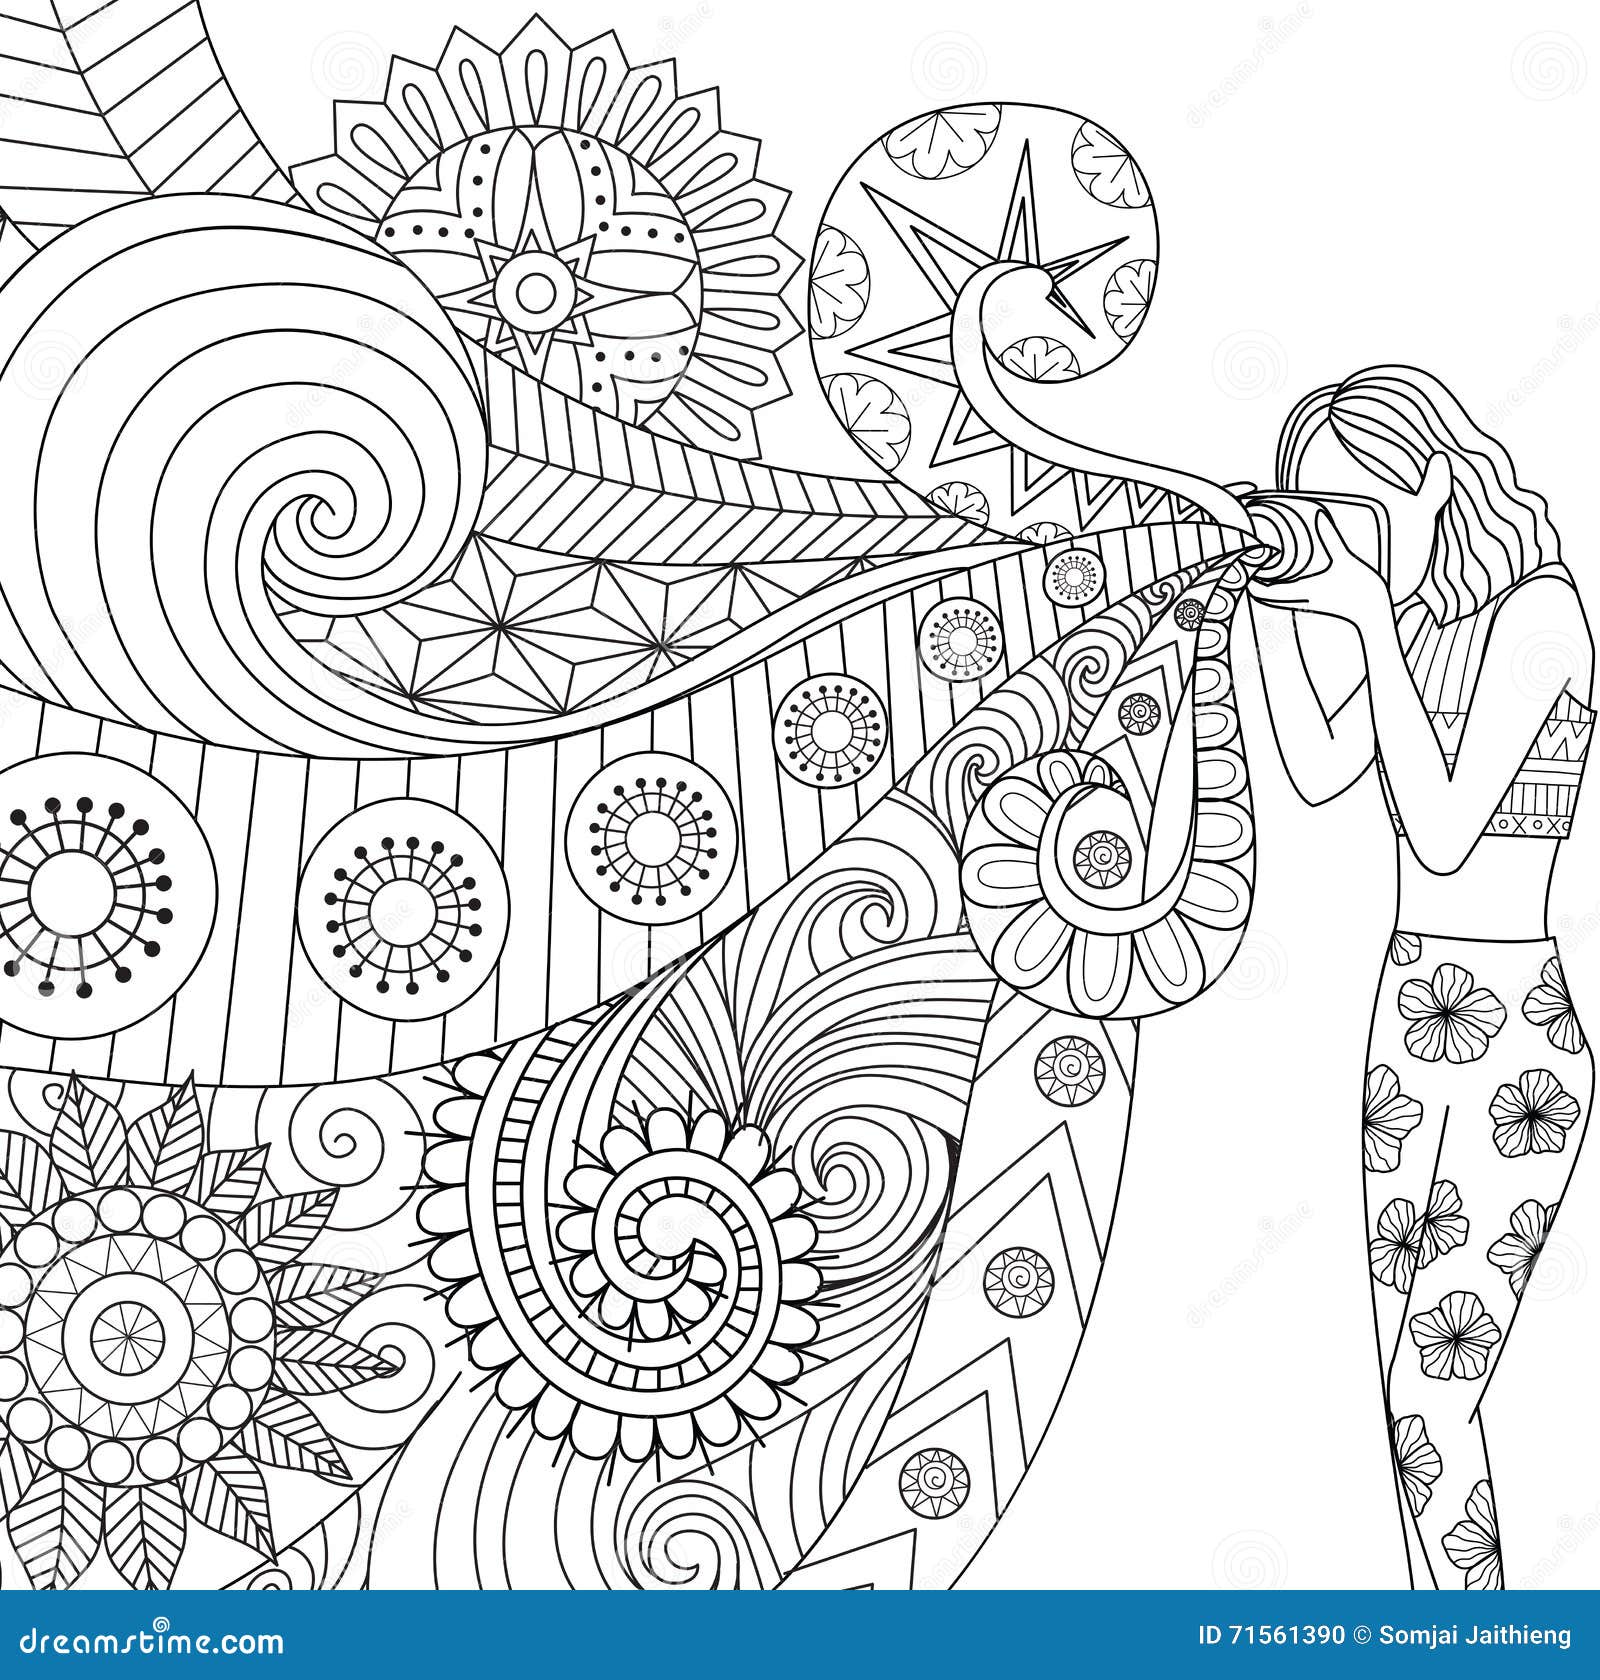 Doodles Design Of A Photographer Girl Taking Photo For Coloring Book